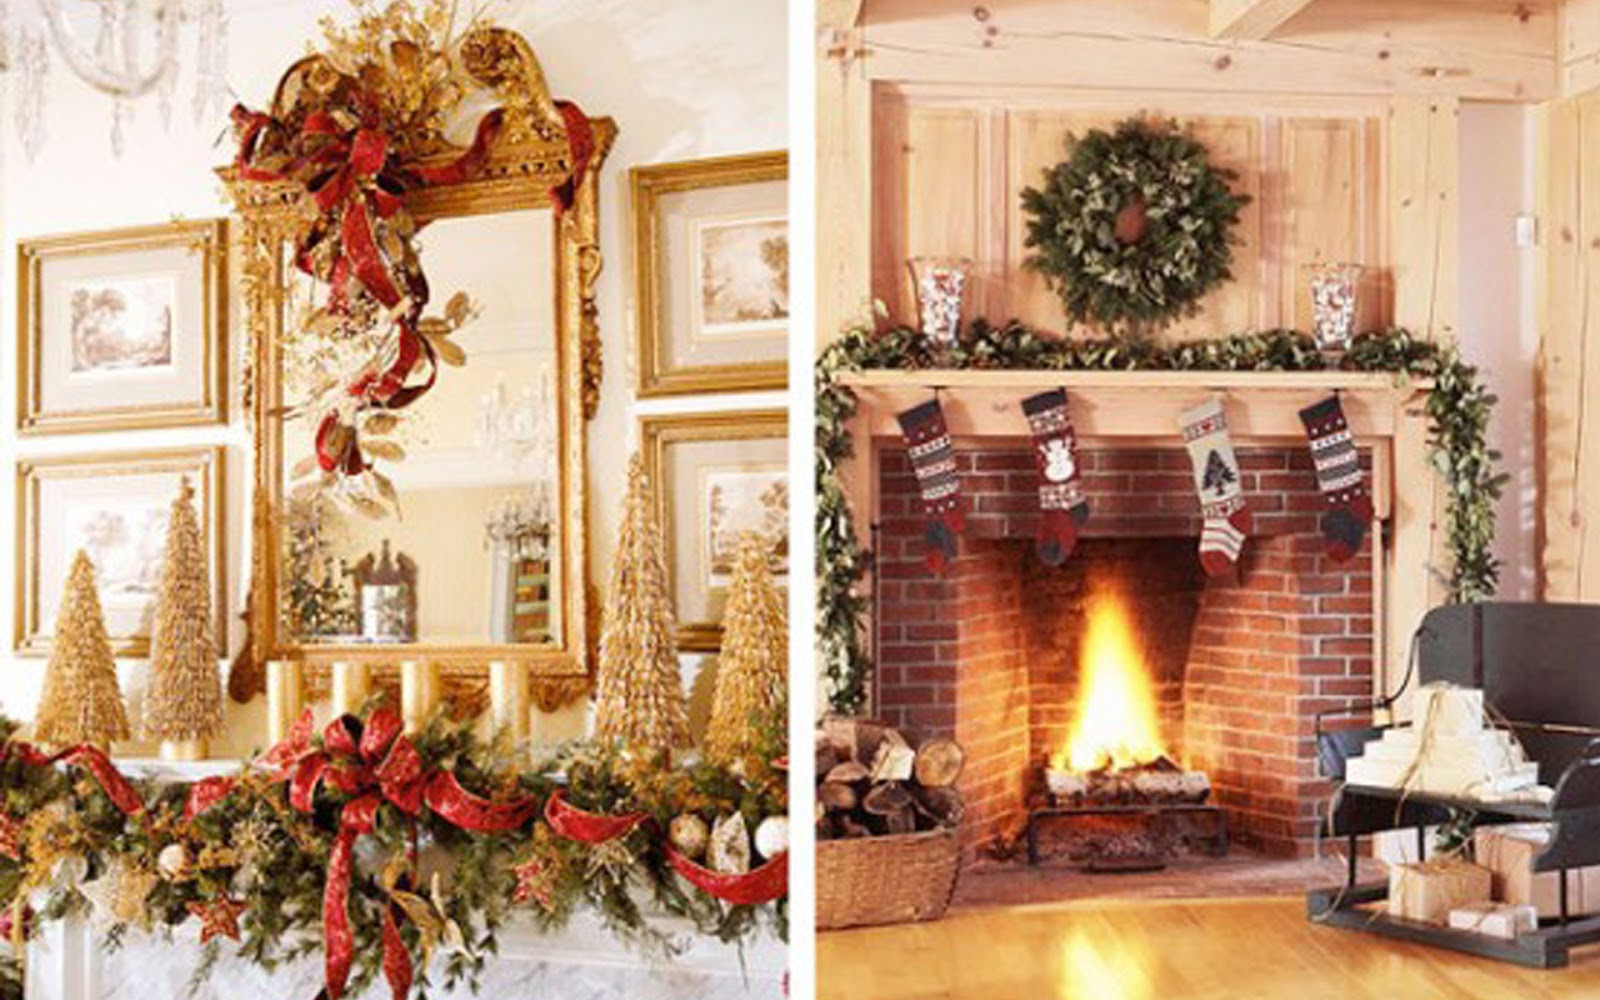 Christmas Home Decor Pinterest
 Decorate your Mantel or Chimney for Christmas Let s